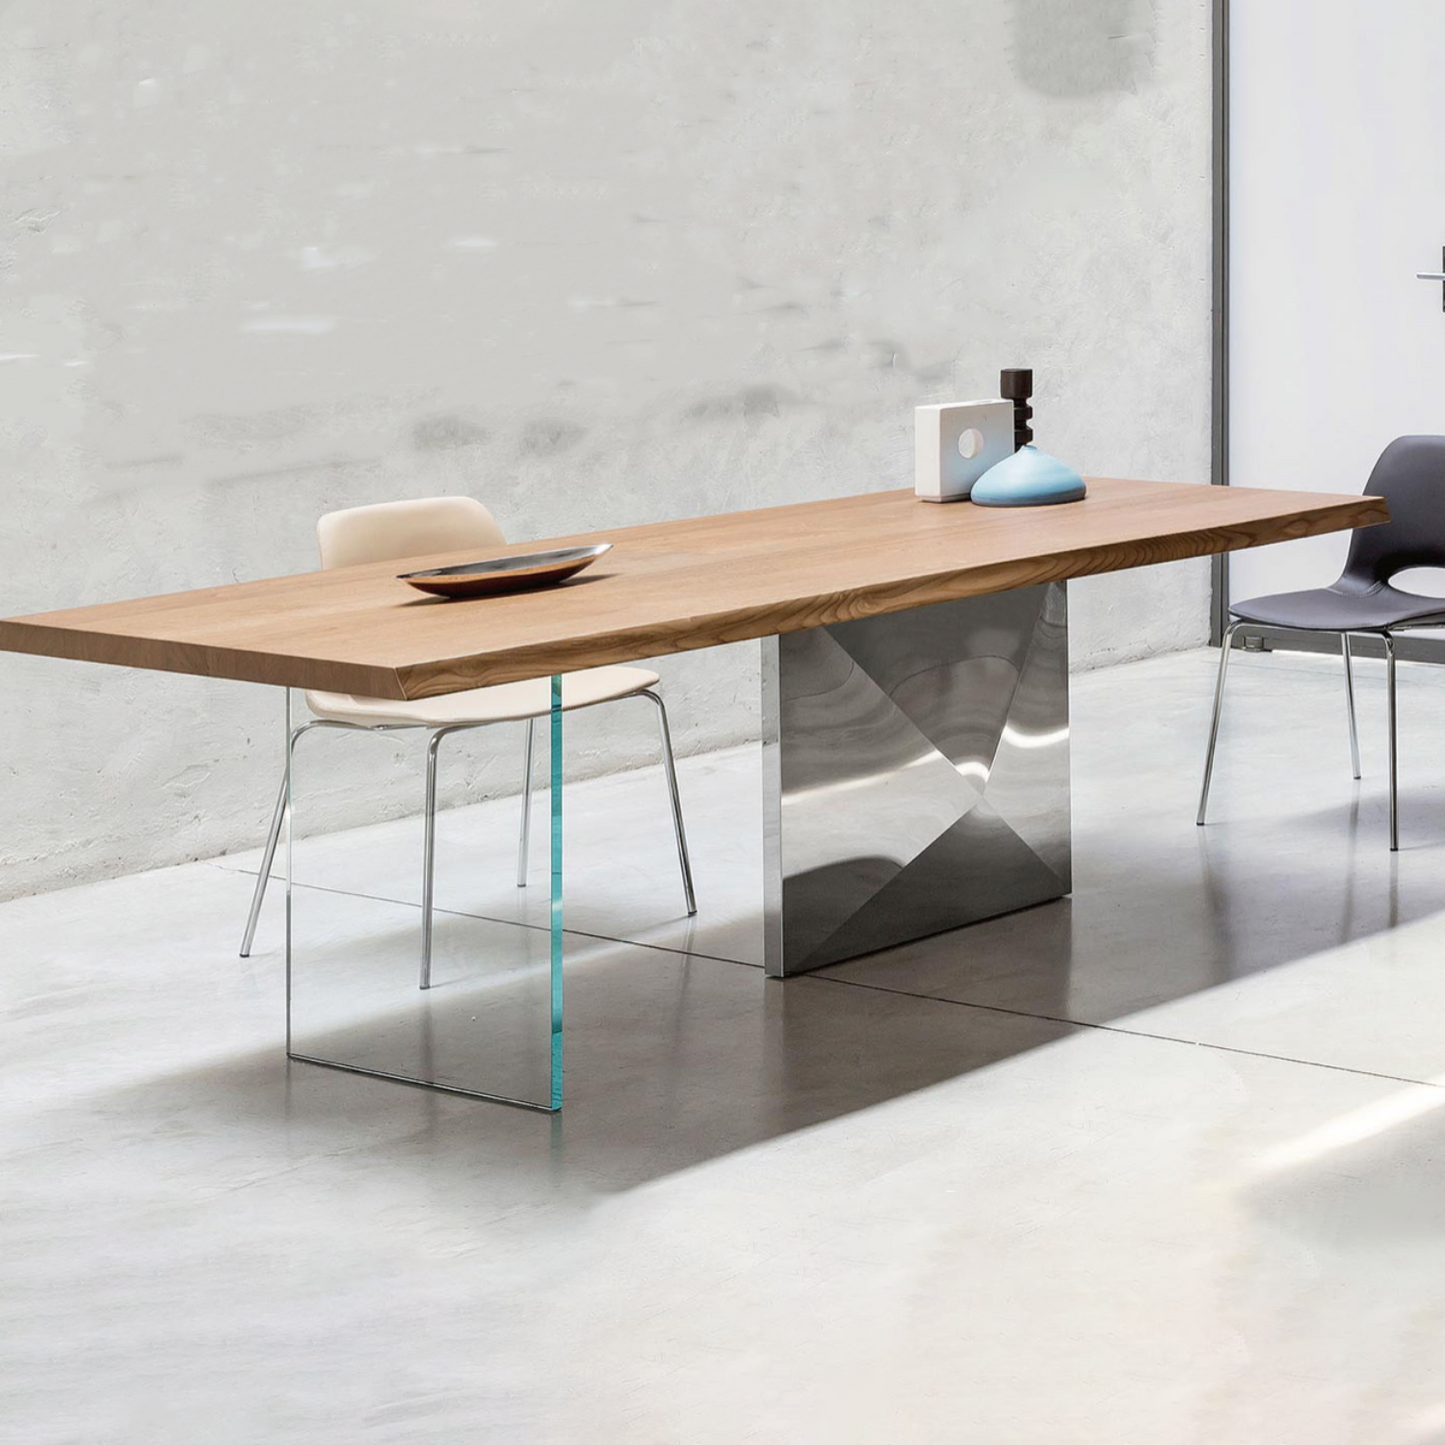 Cubric Table by Riflessi Lab